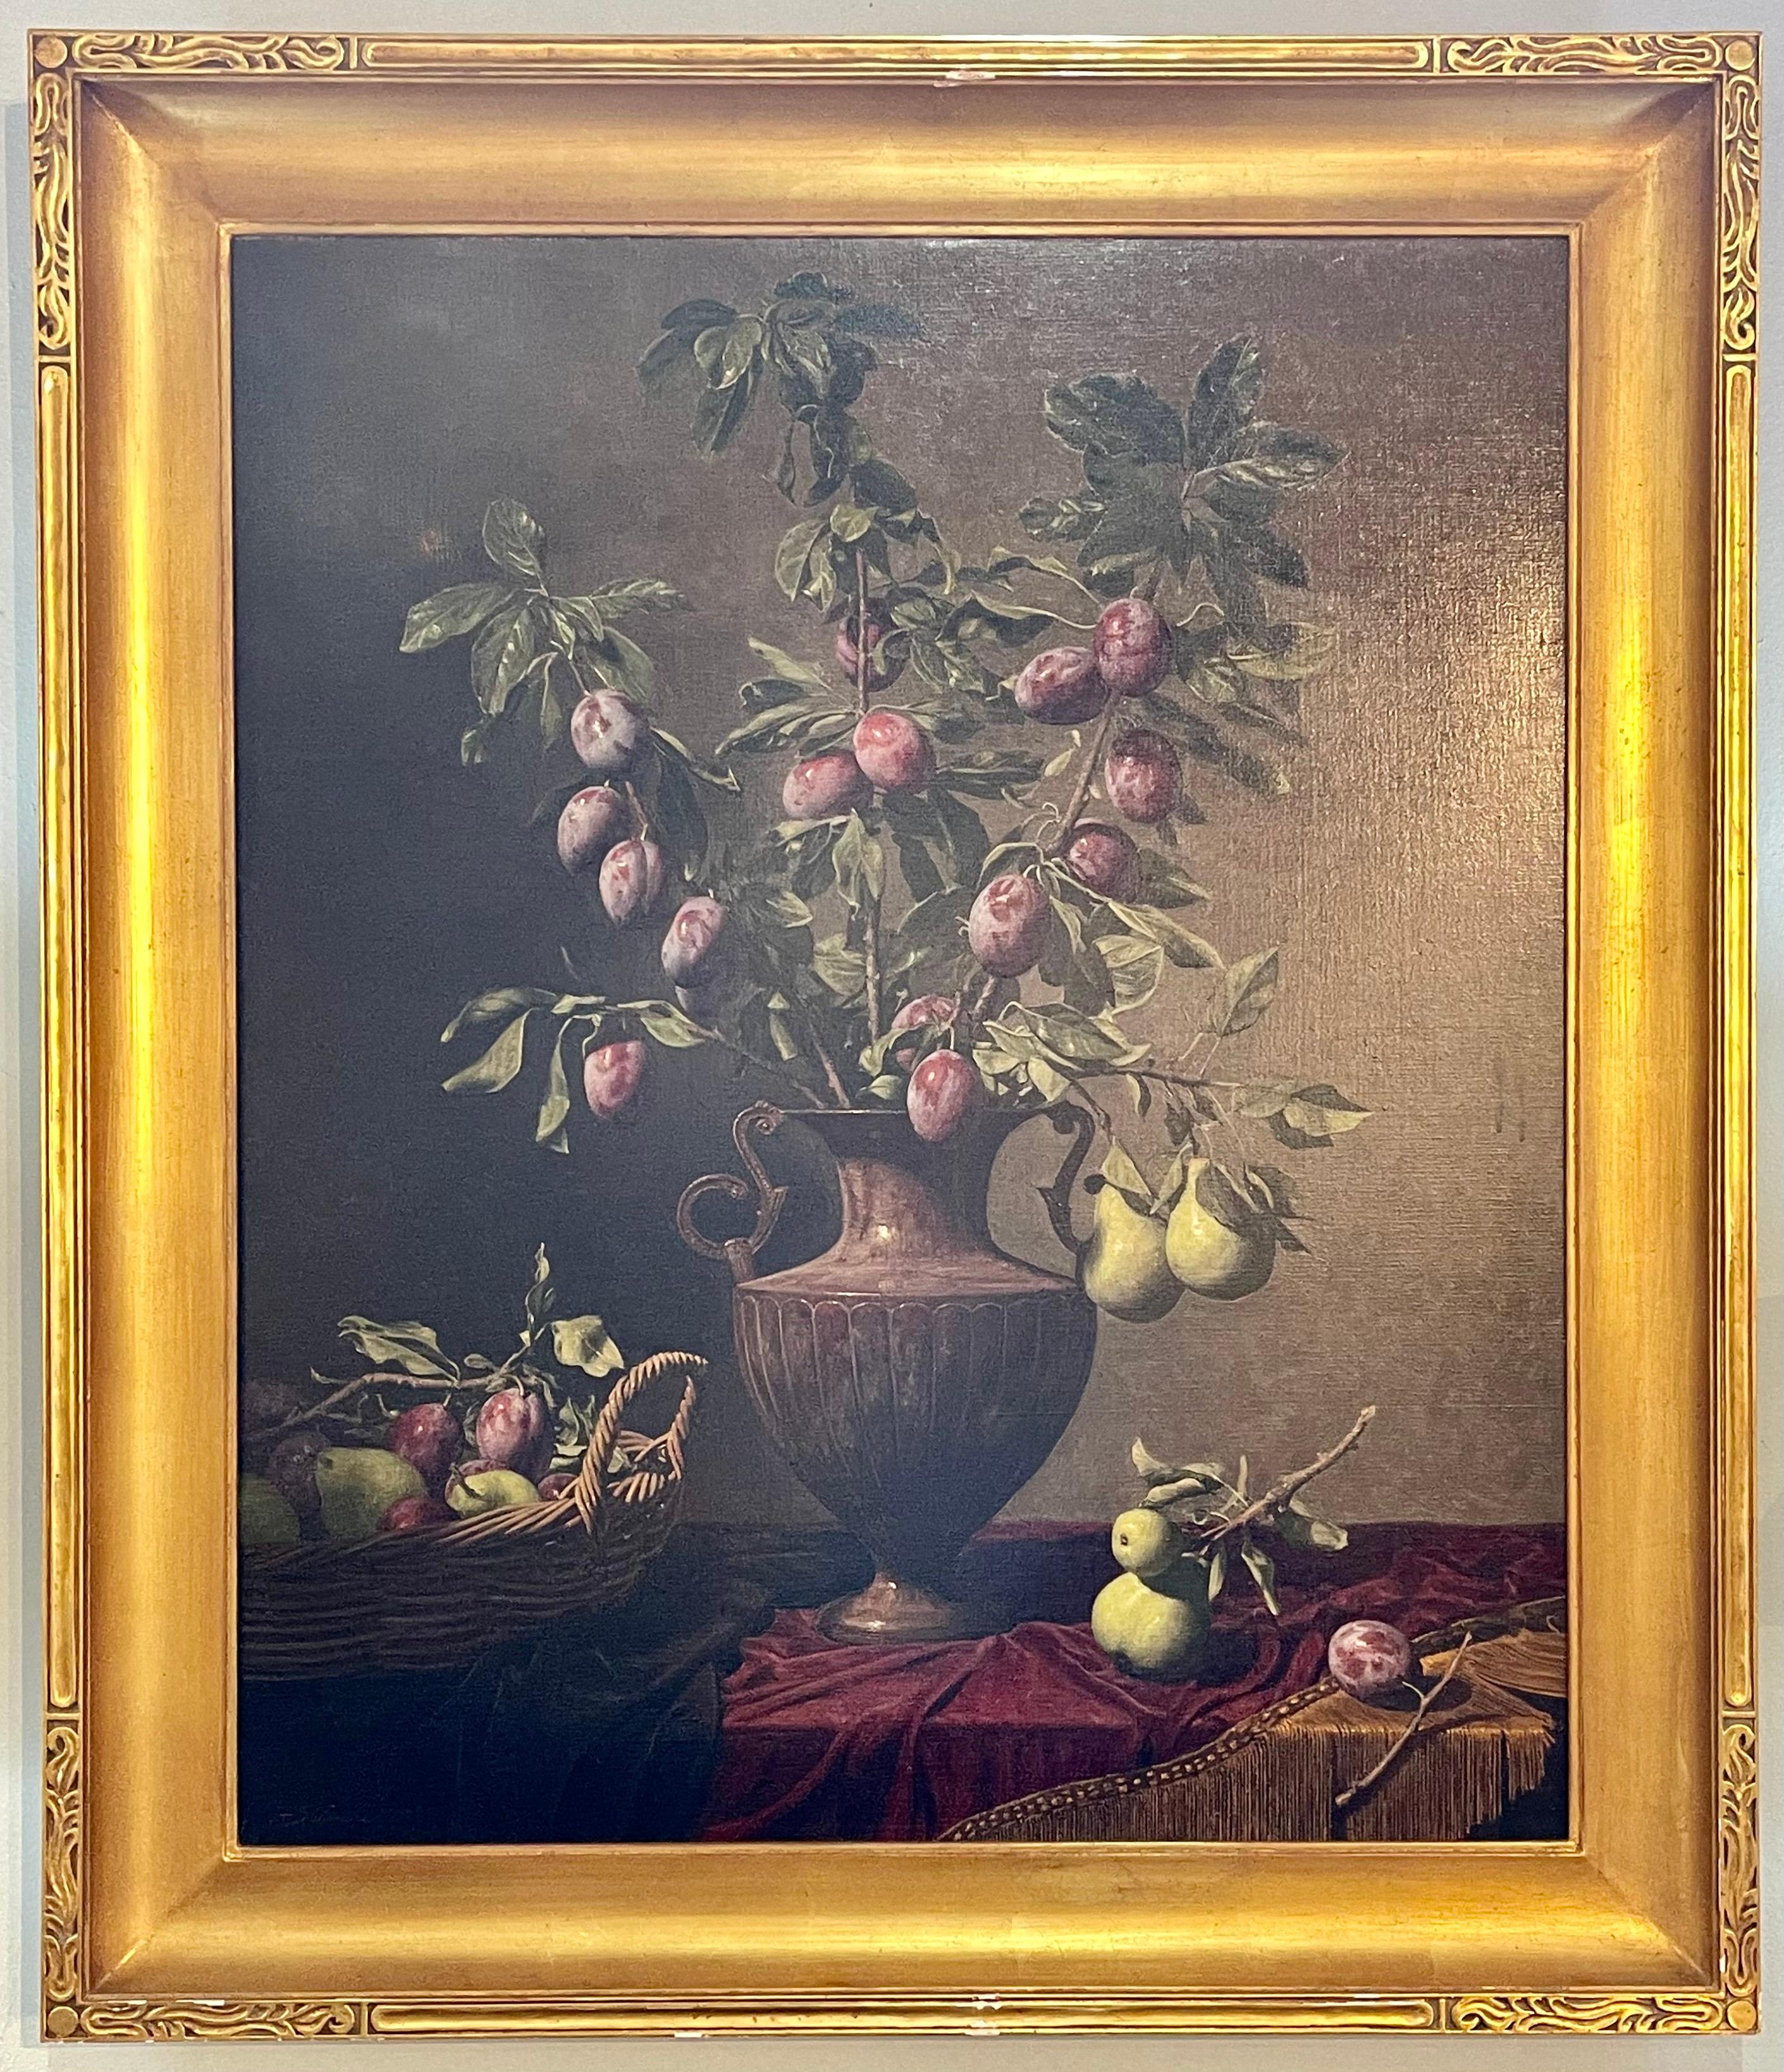 Frank Arcuri, “Small Feast with Figs” 1999

Frank Arcuri – (b. 1946) American, studied at the School of Visual Arts and the Arts Student League. He is a modern master of classically inspired still life images who considers the creation of his